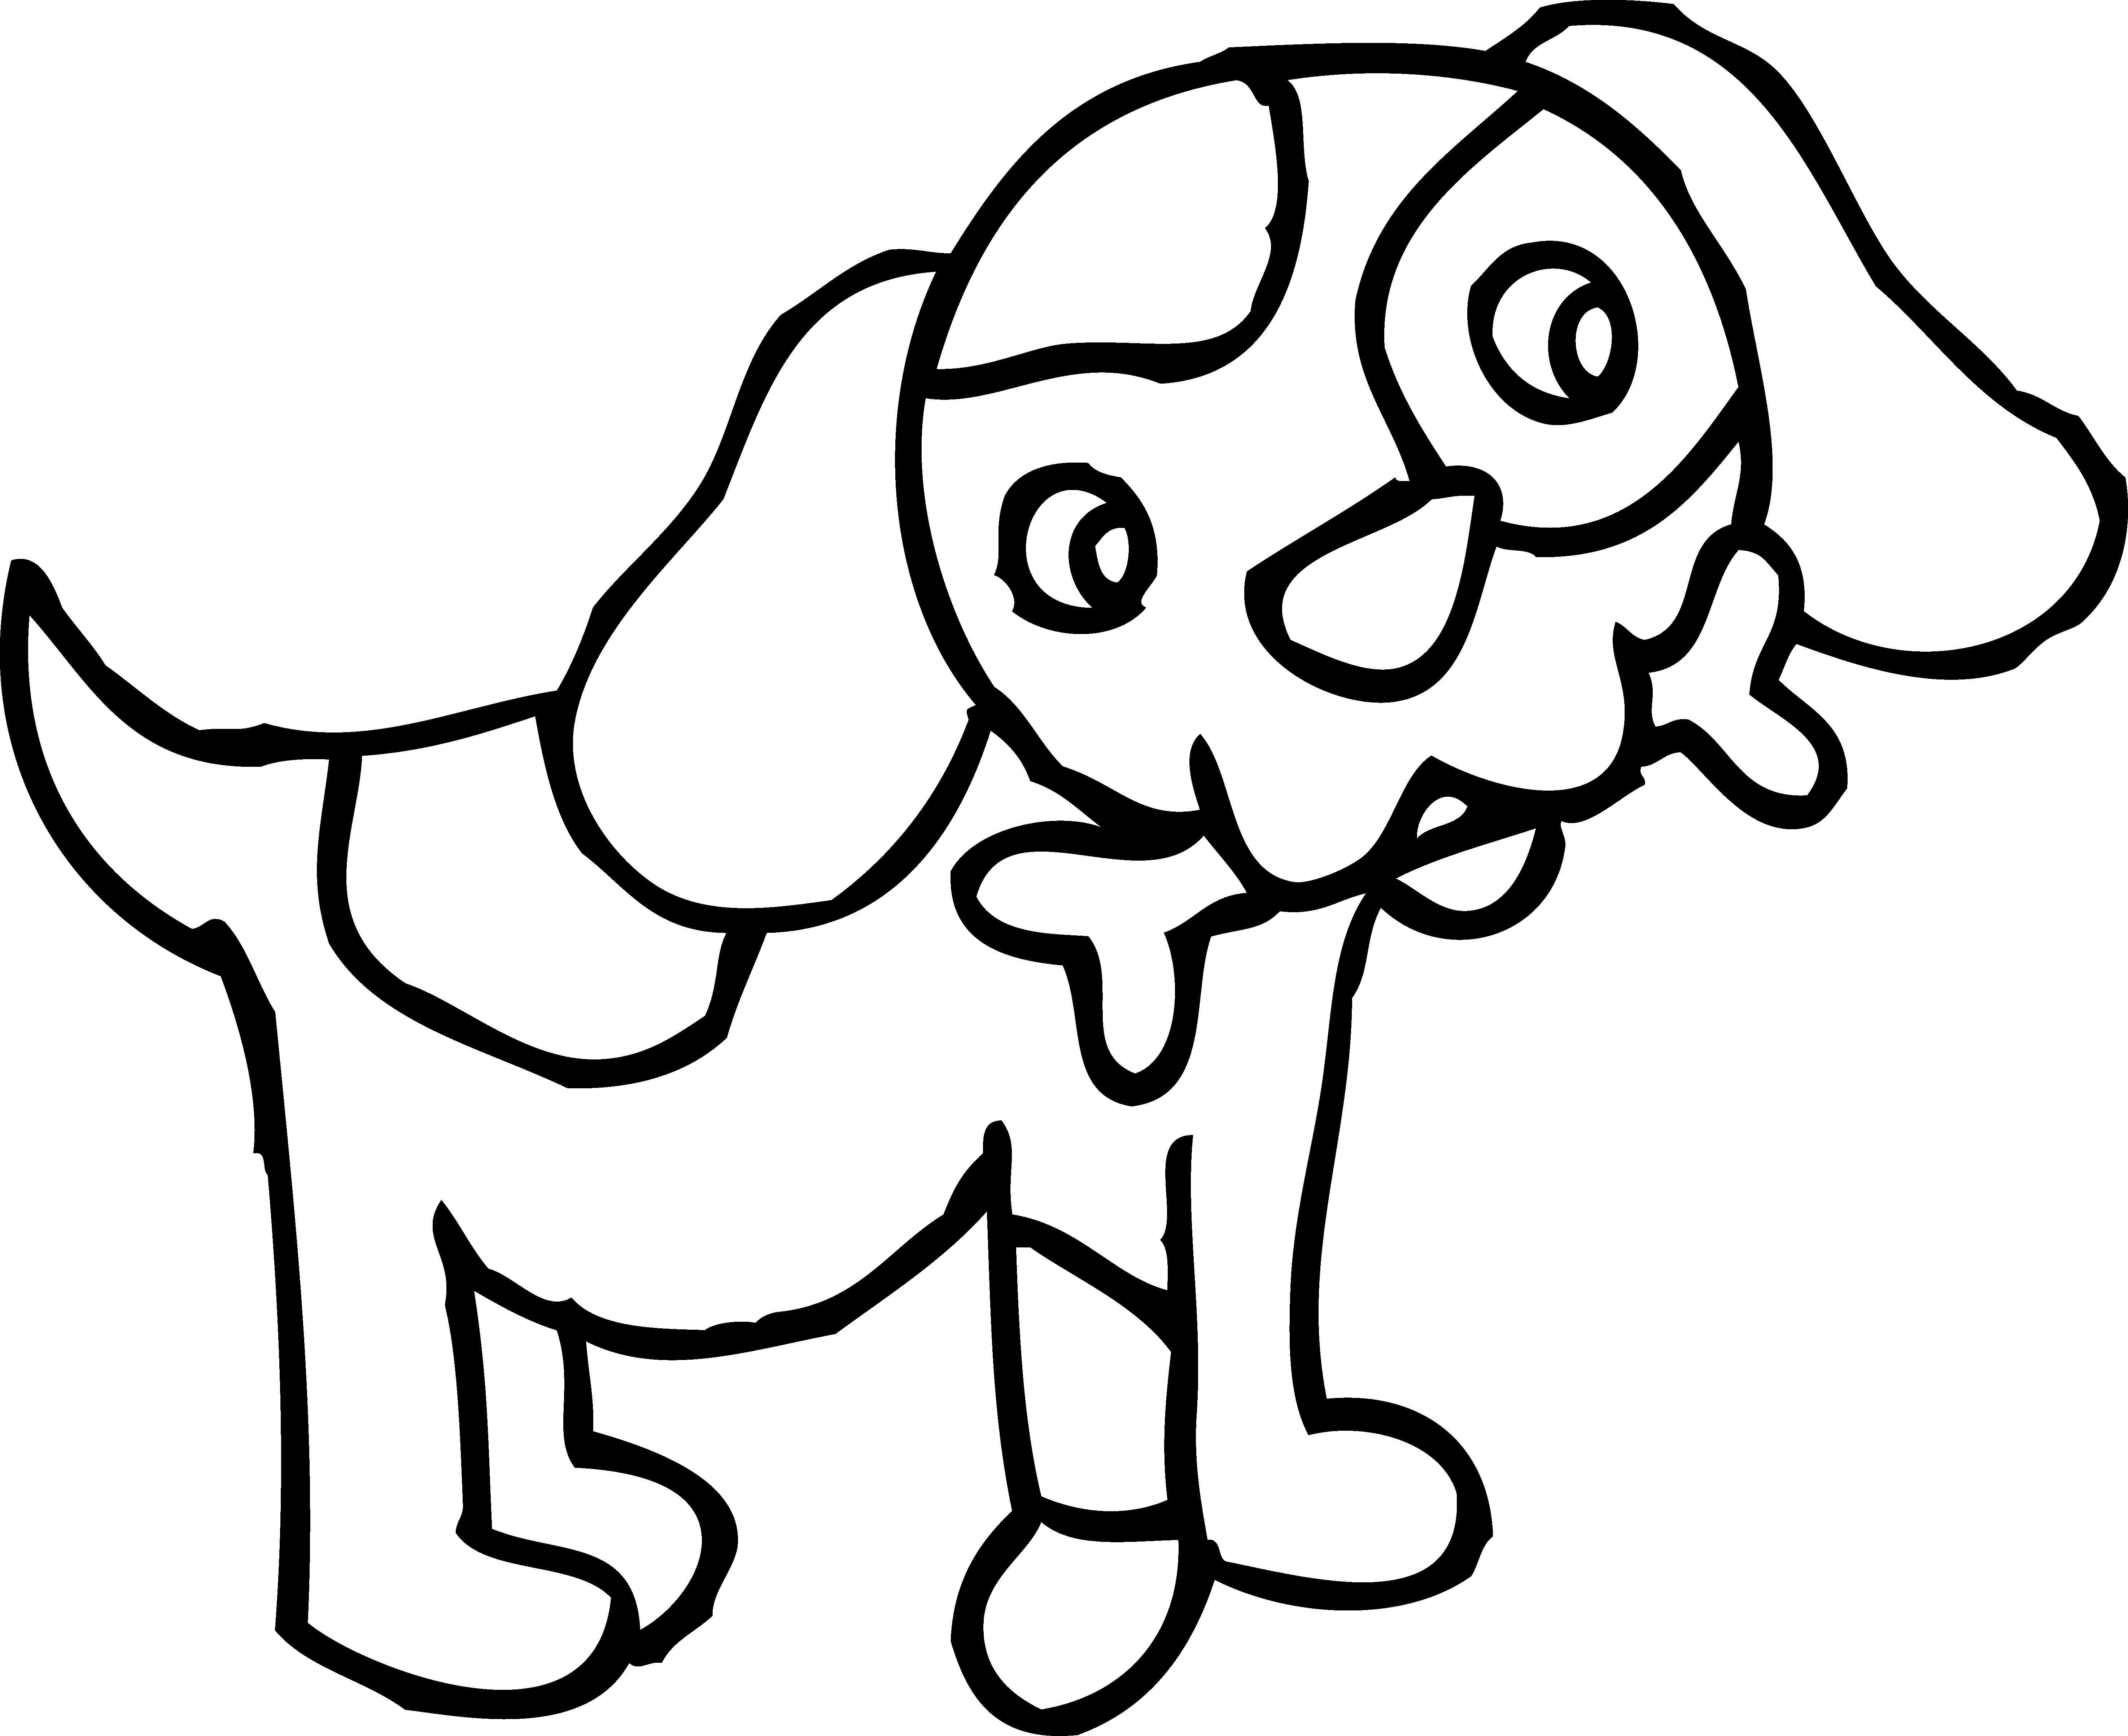 Dog Face Clip Art Black And White | Clipart library - Free Clipart 